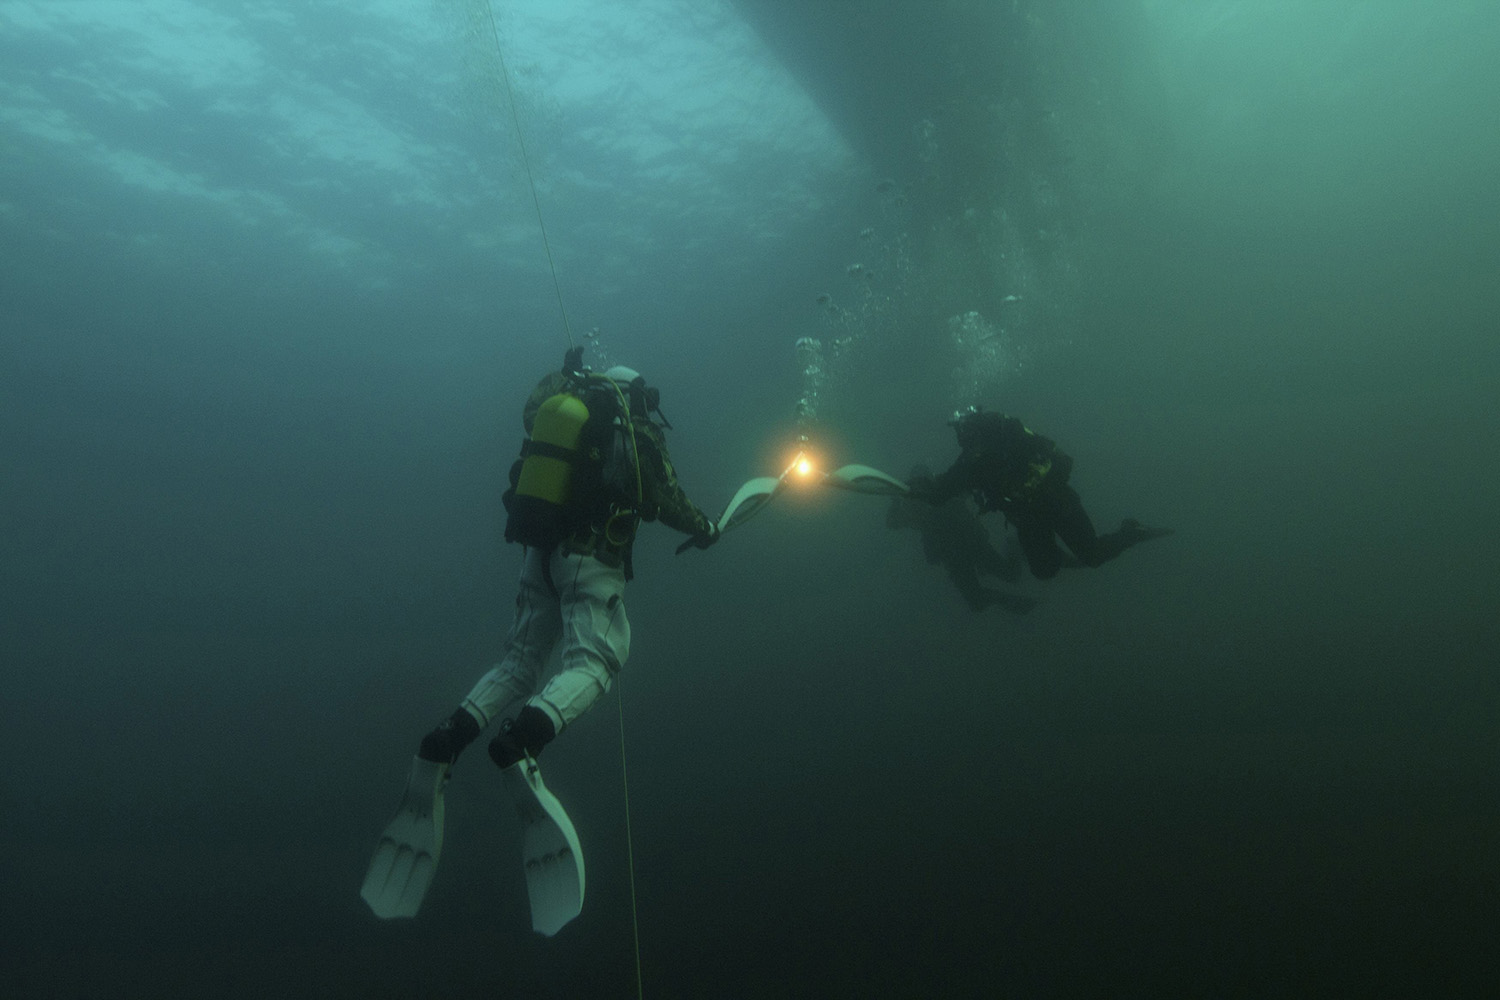 Diving torchbearers are seen during the Sochi 2014 Winter Olympic torch relay underwater Lake Baikal